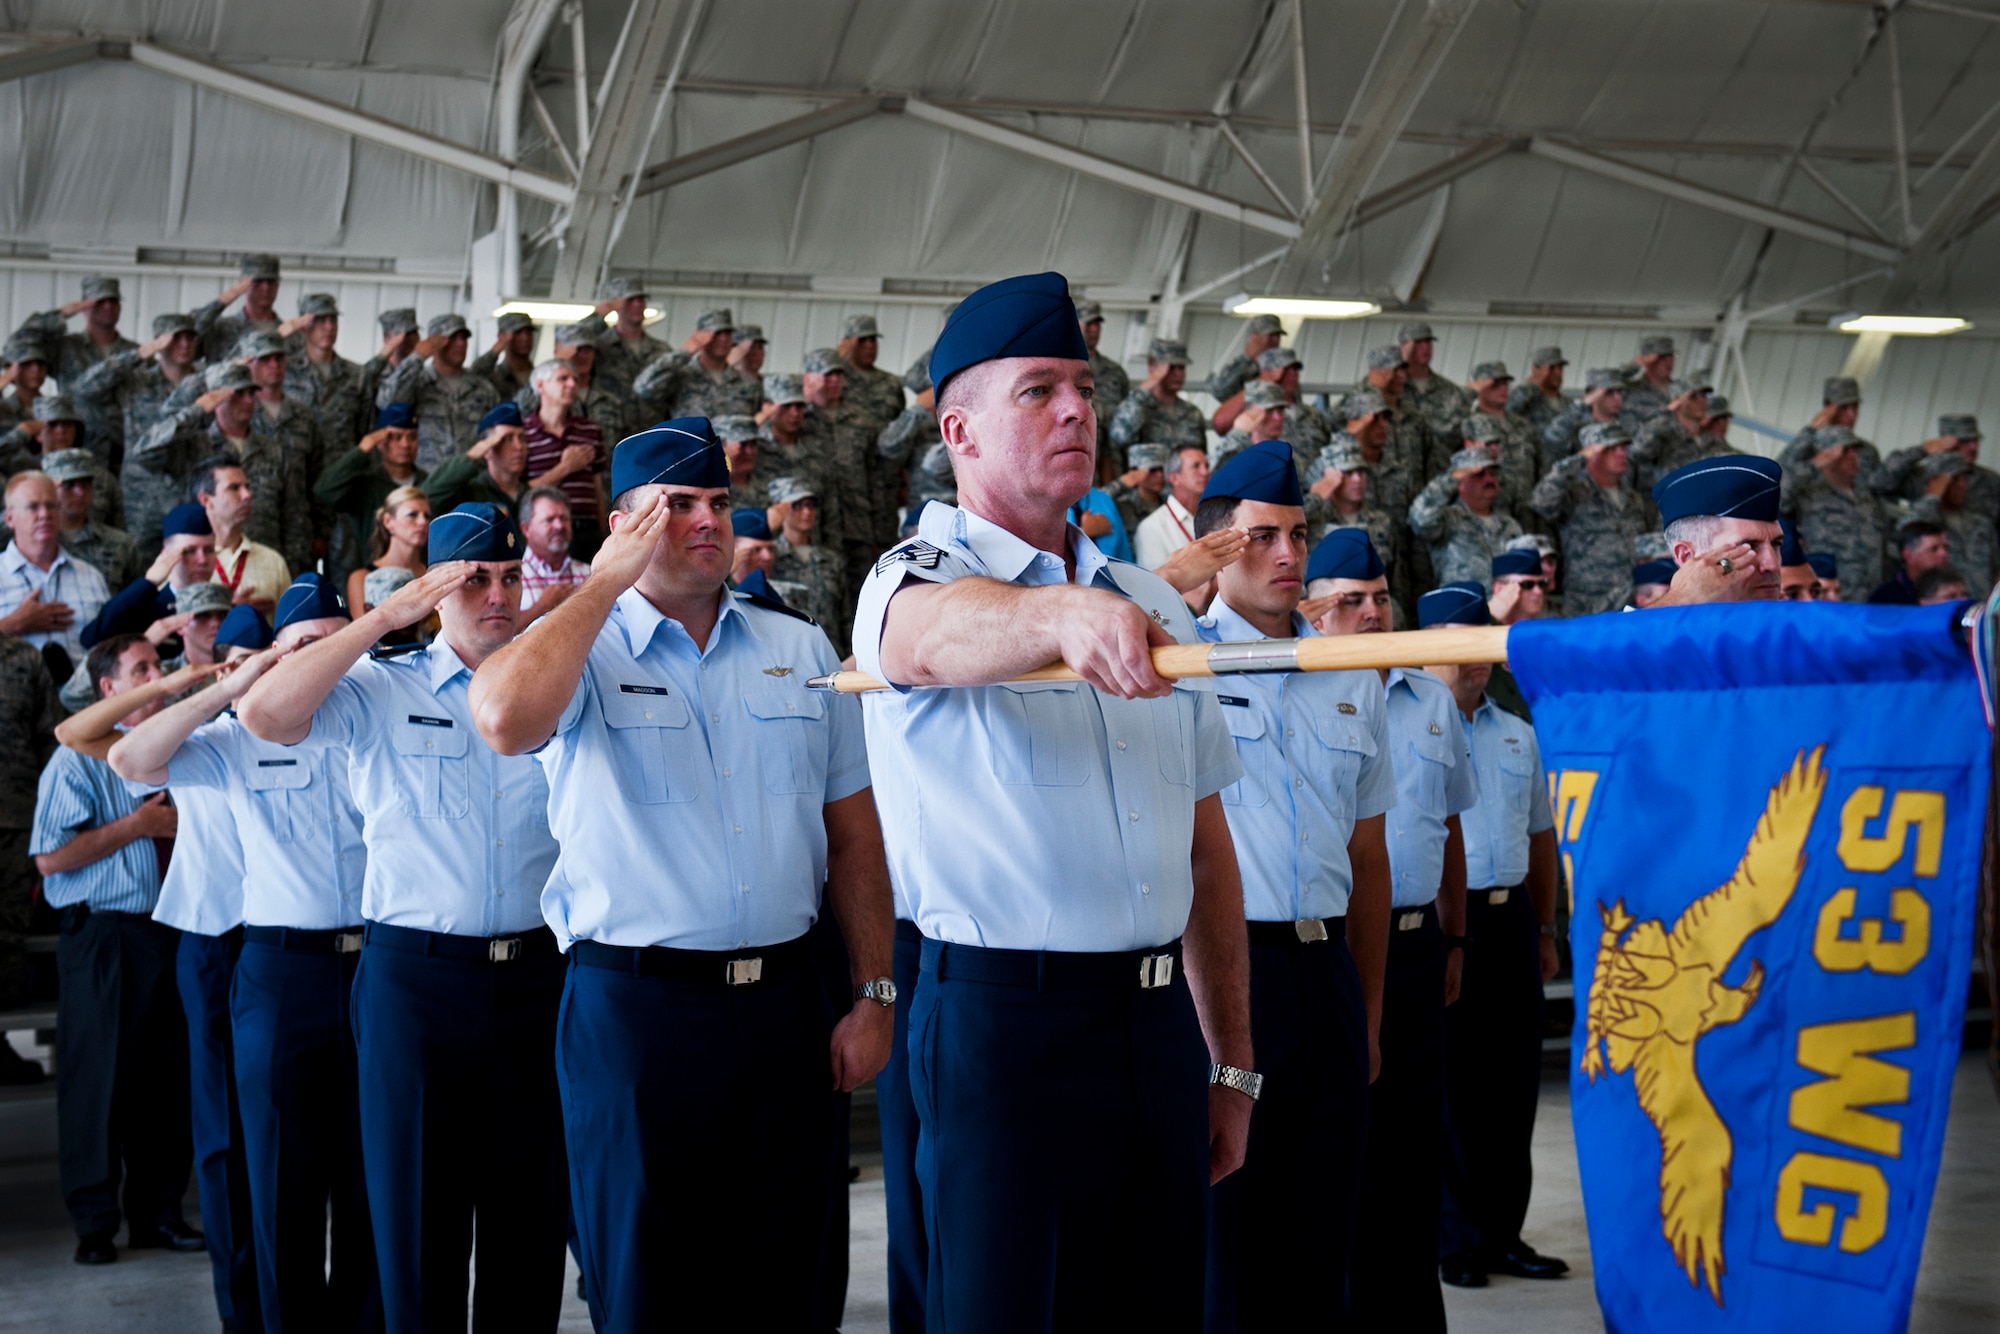 Chief Master Sgt. Jeffery Duncan and a flight of 53rd Test and Evaluation Group Airmen salute during the National Anthem at the 53rd Wing change of command ceremony May 30 at Eglin Air Force Base, Fla.  Col. Alexus Grynkewich took command of the wing from Col. David Hicks, who leaves to become the deputy director of operations for North American Aerospace Defense Command at Peterson, AFB, Colo.  (U.S. Air Force photo/Samuel King Jr.)